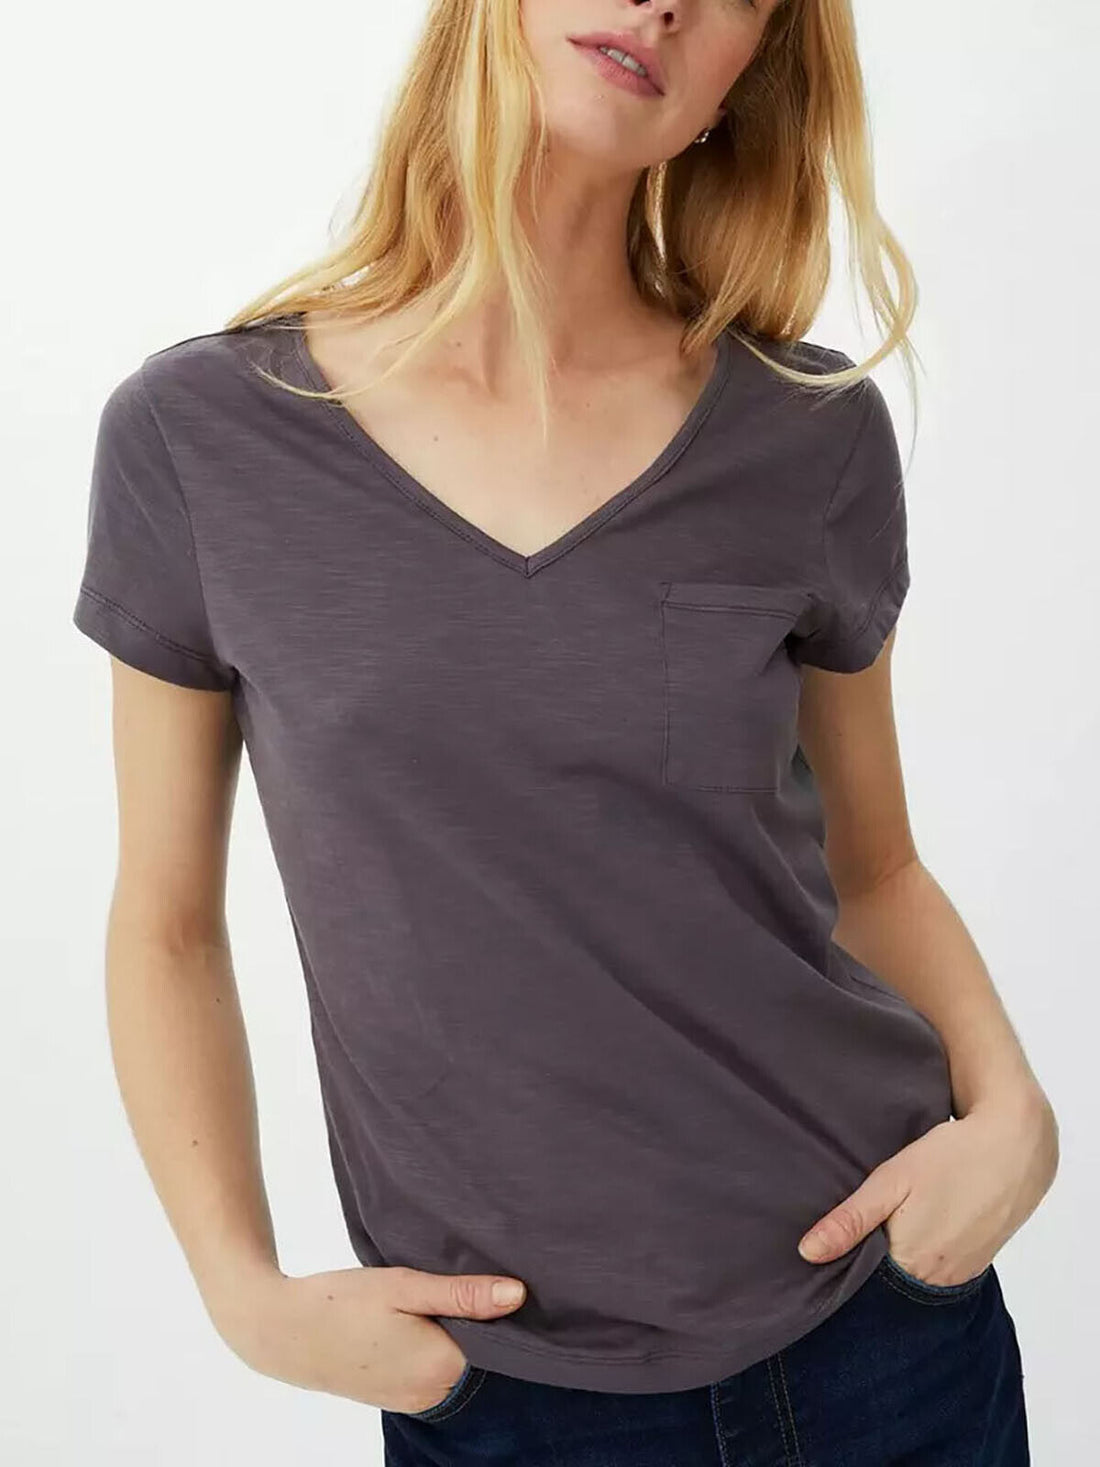 Mantaray Charcoal Pure Cotton Pocket T-Shirt in Sizes 14 or 16